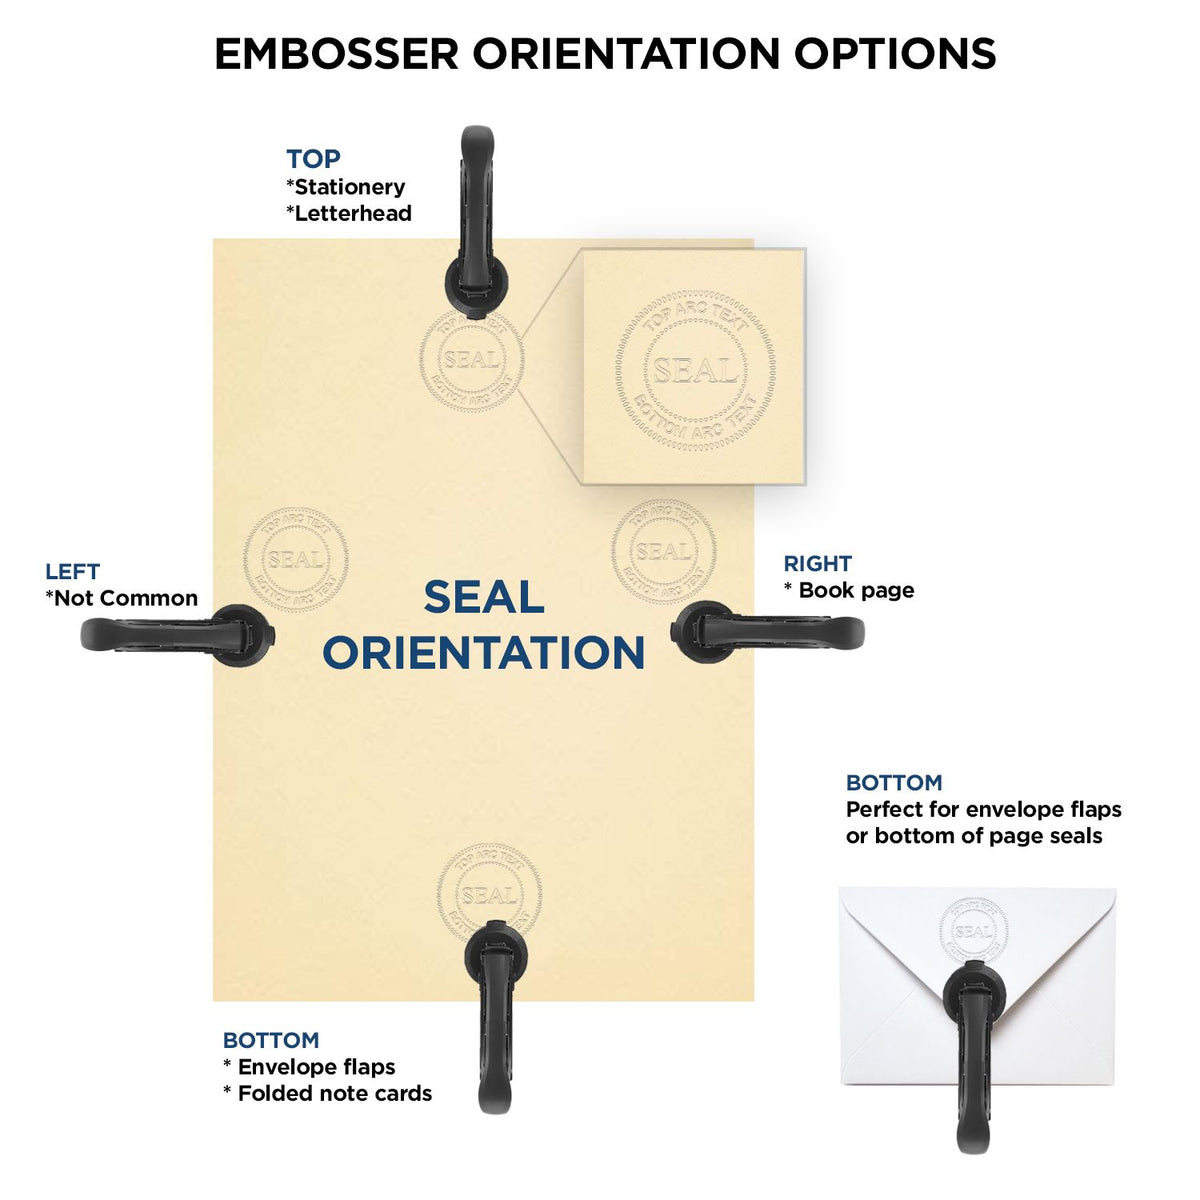 An infographic for the State of North Carolina Soft Land Surveyor Embossing Seal showing embosser orientation, this is showing examples of a top, bottom, right and left insert.